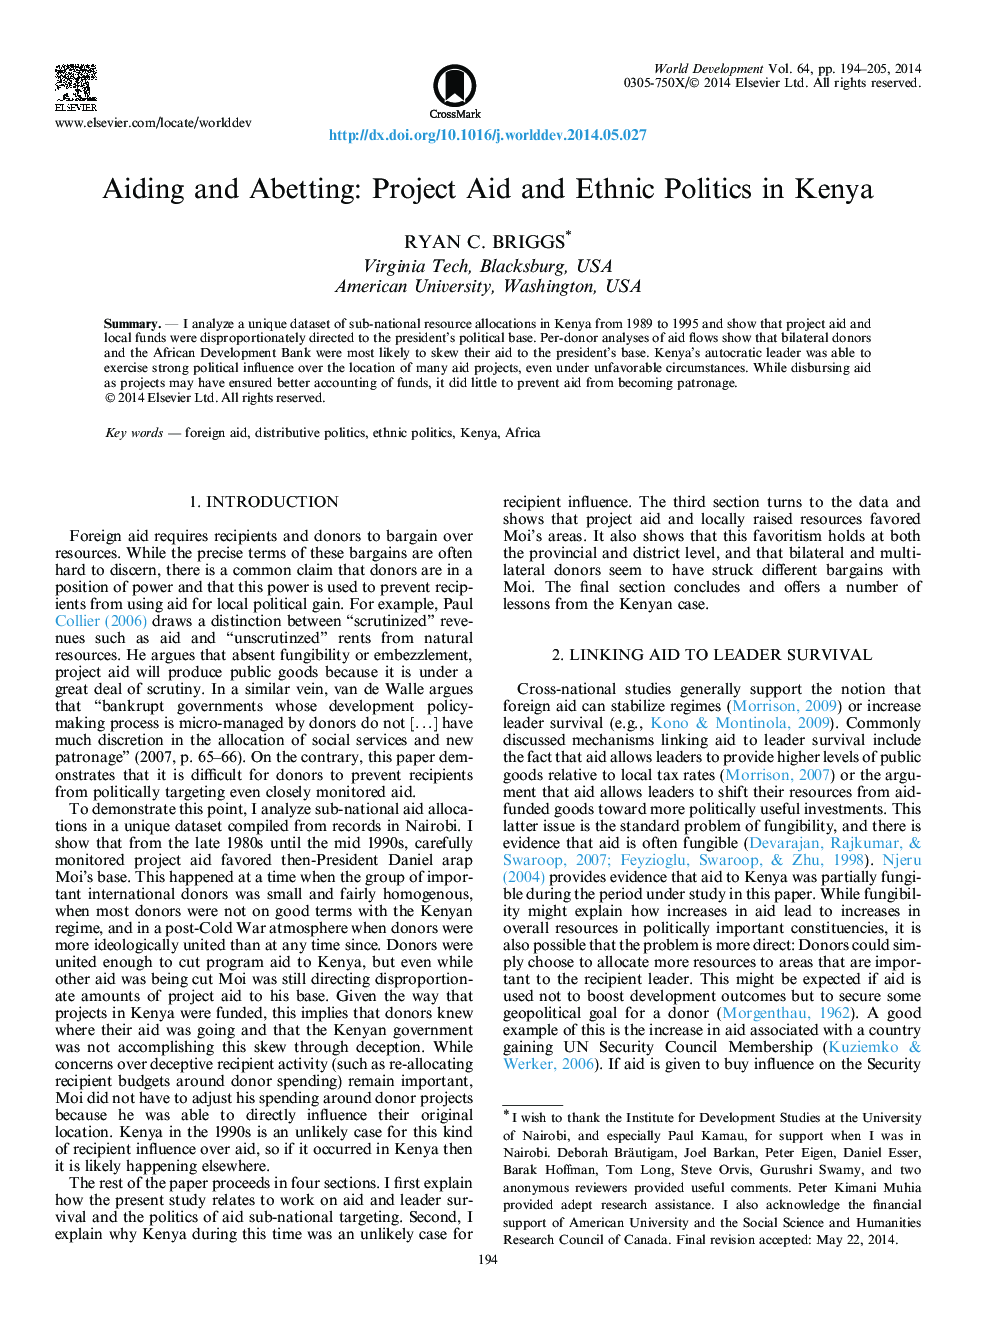 Aiding and Abetting: Project Aid and Ethnic Politics in Kenya